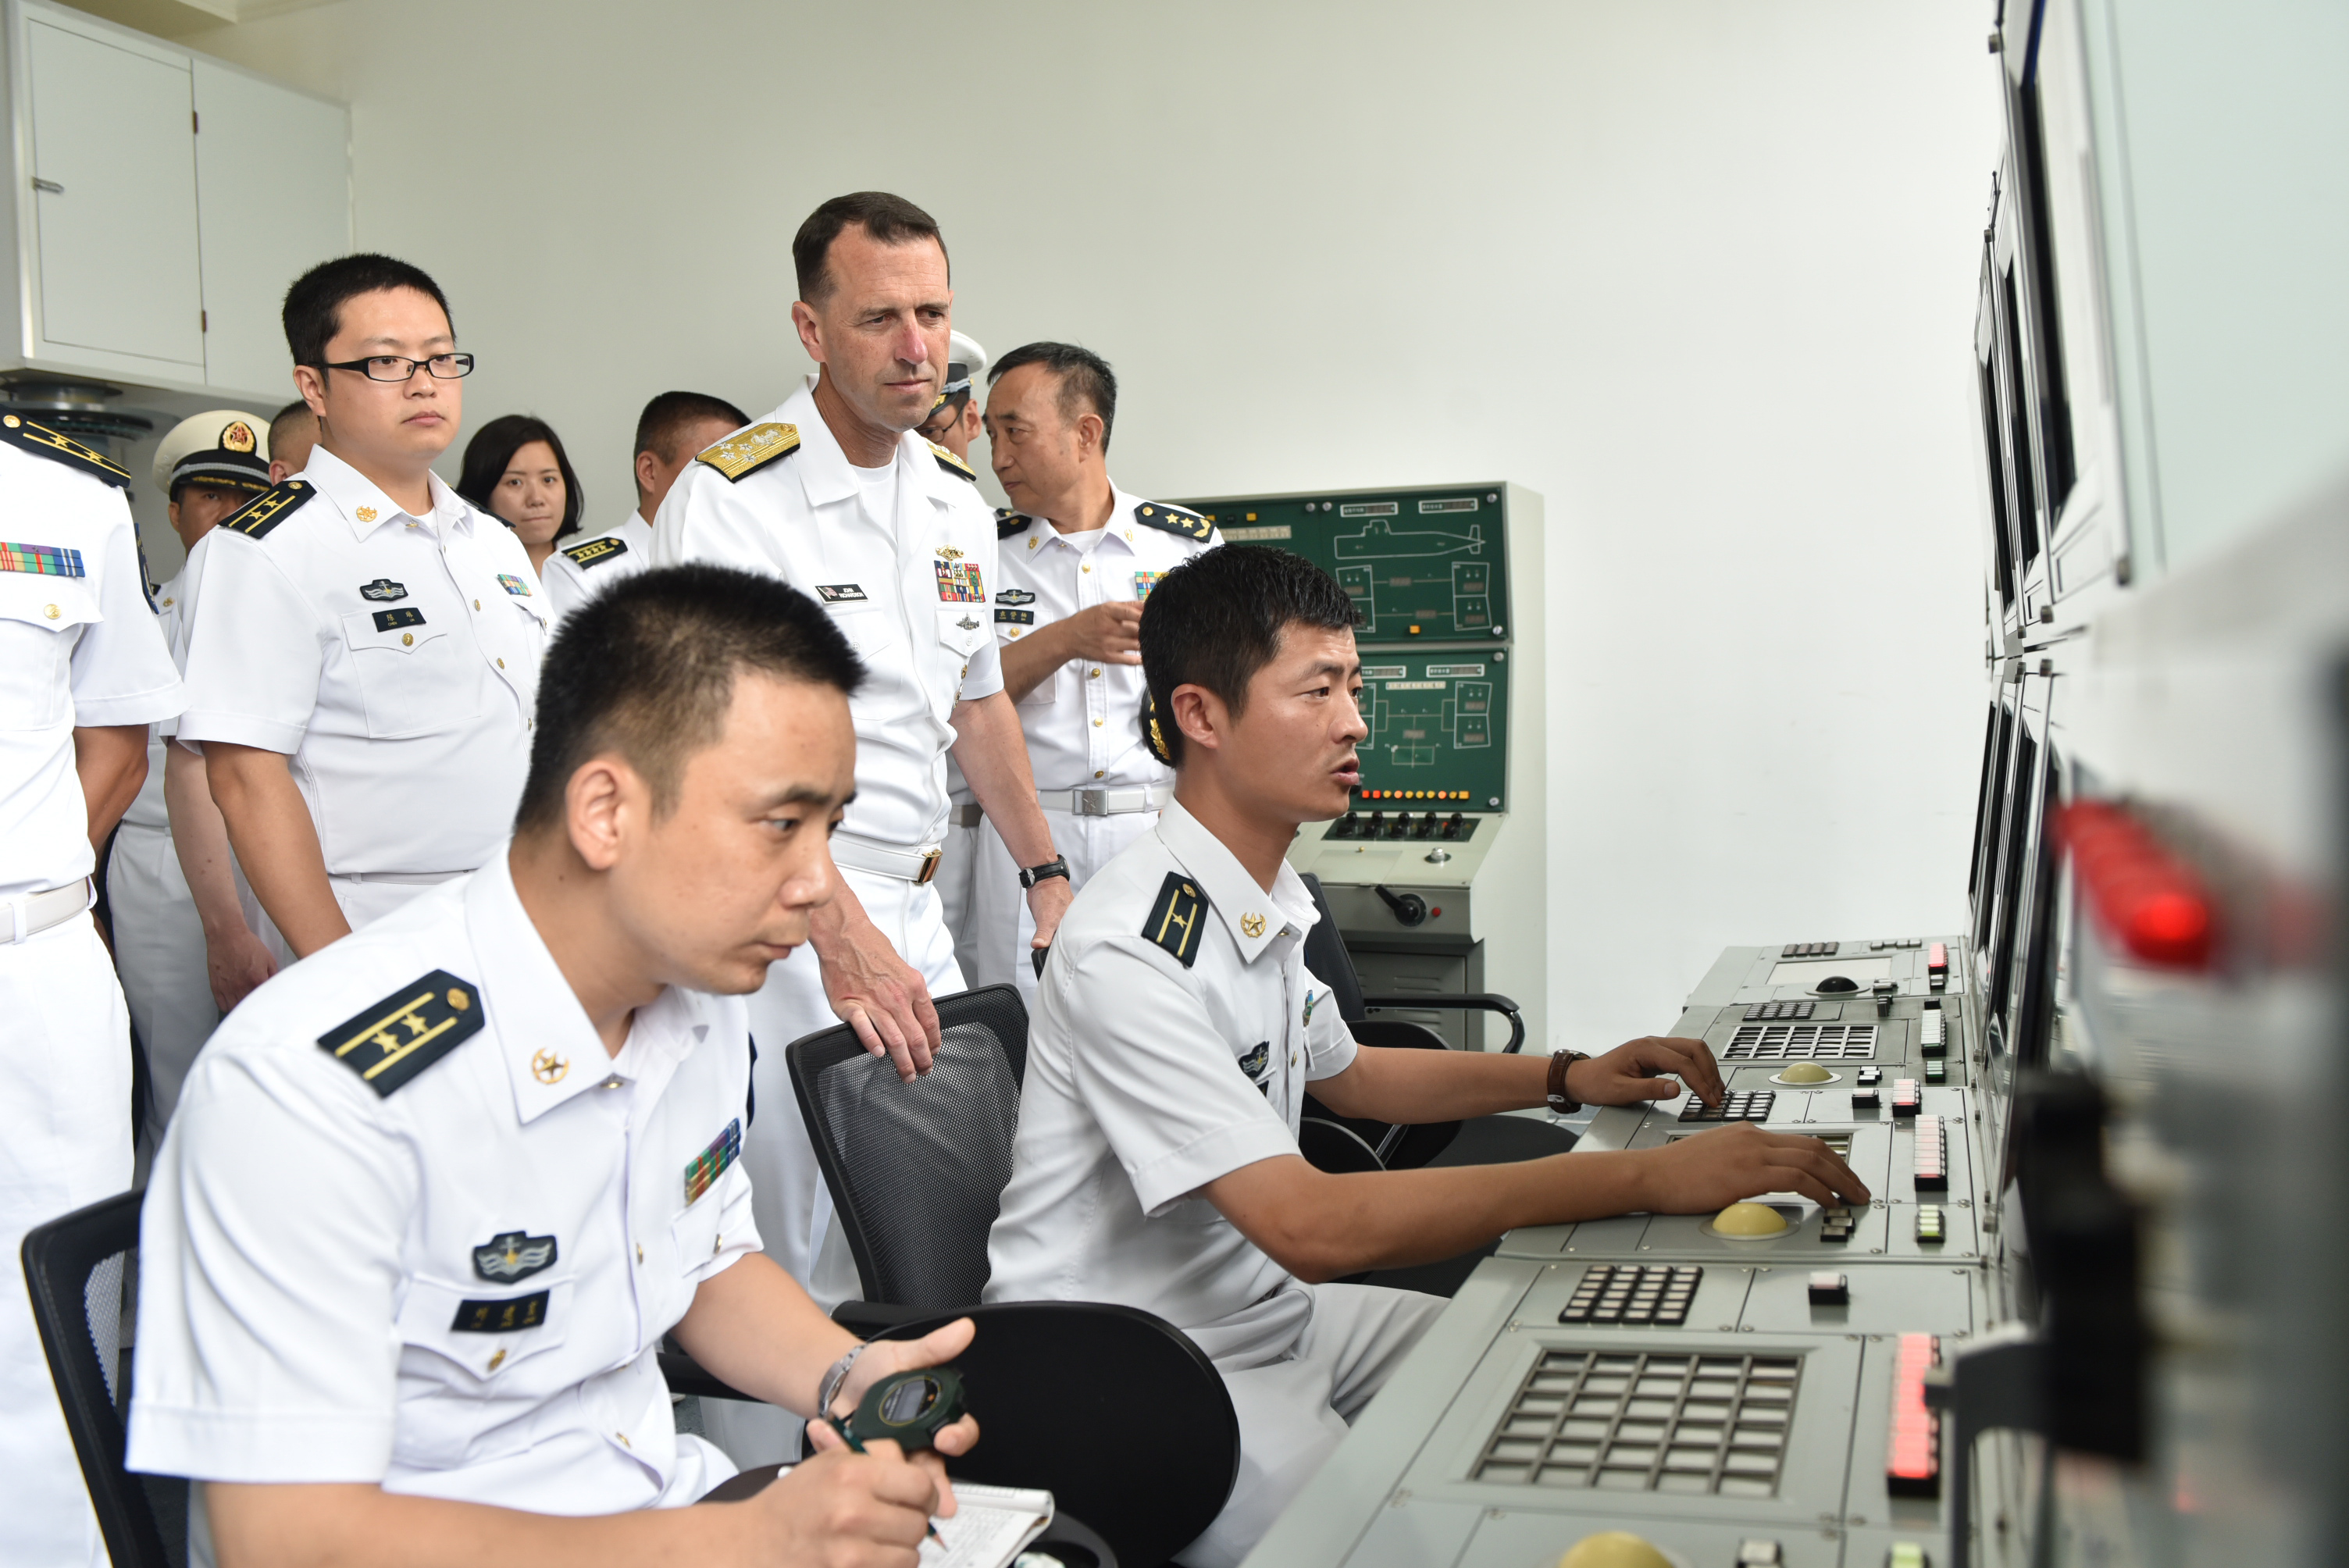 Chief of Naval Operations (CNO) Adm. John Richardson visits the Chinese People's Liberation Army (Navy) (PLA(N)) Submarine Academy, North Sea Fleet Headquarters and a PLAN frigate and submarine in Qingdao, China on July 20, 2016. US Navy photo.